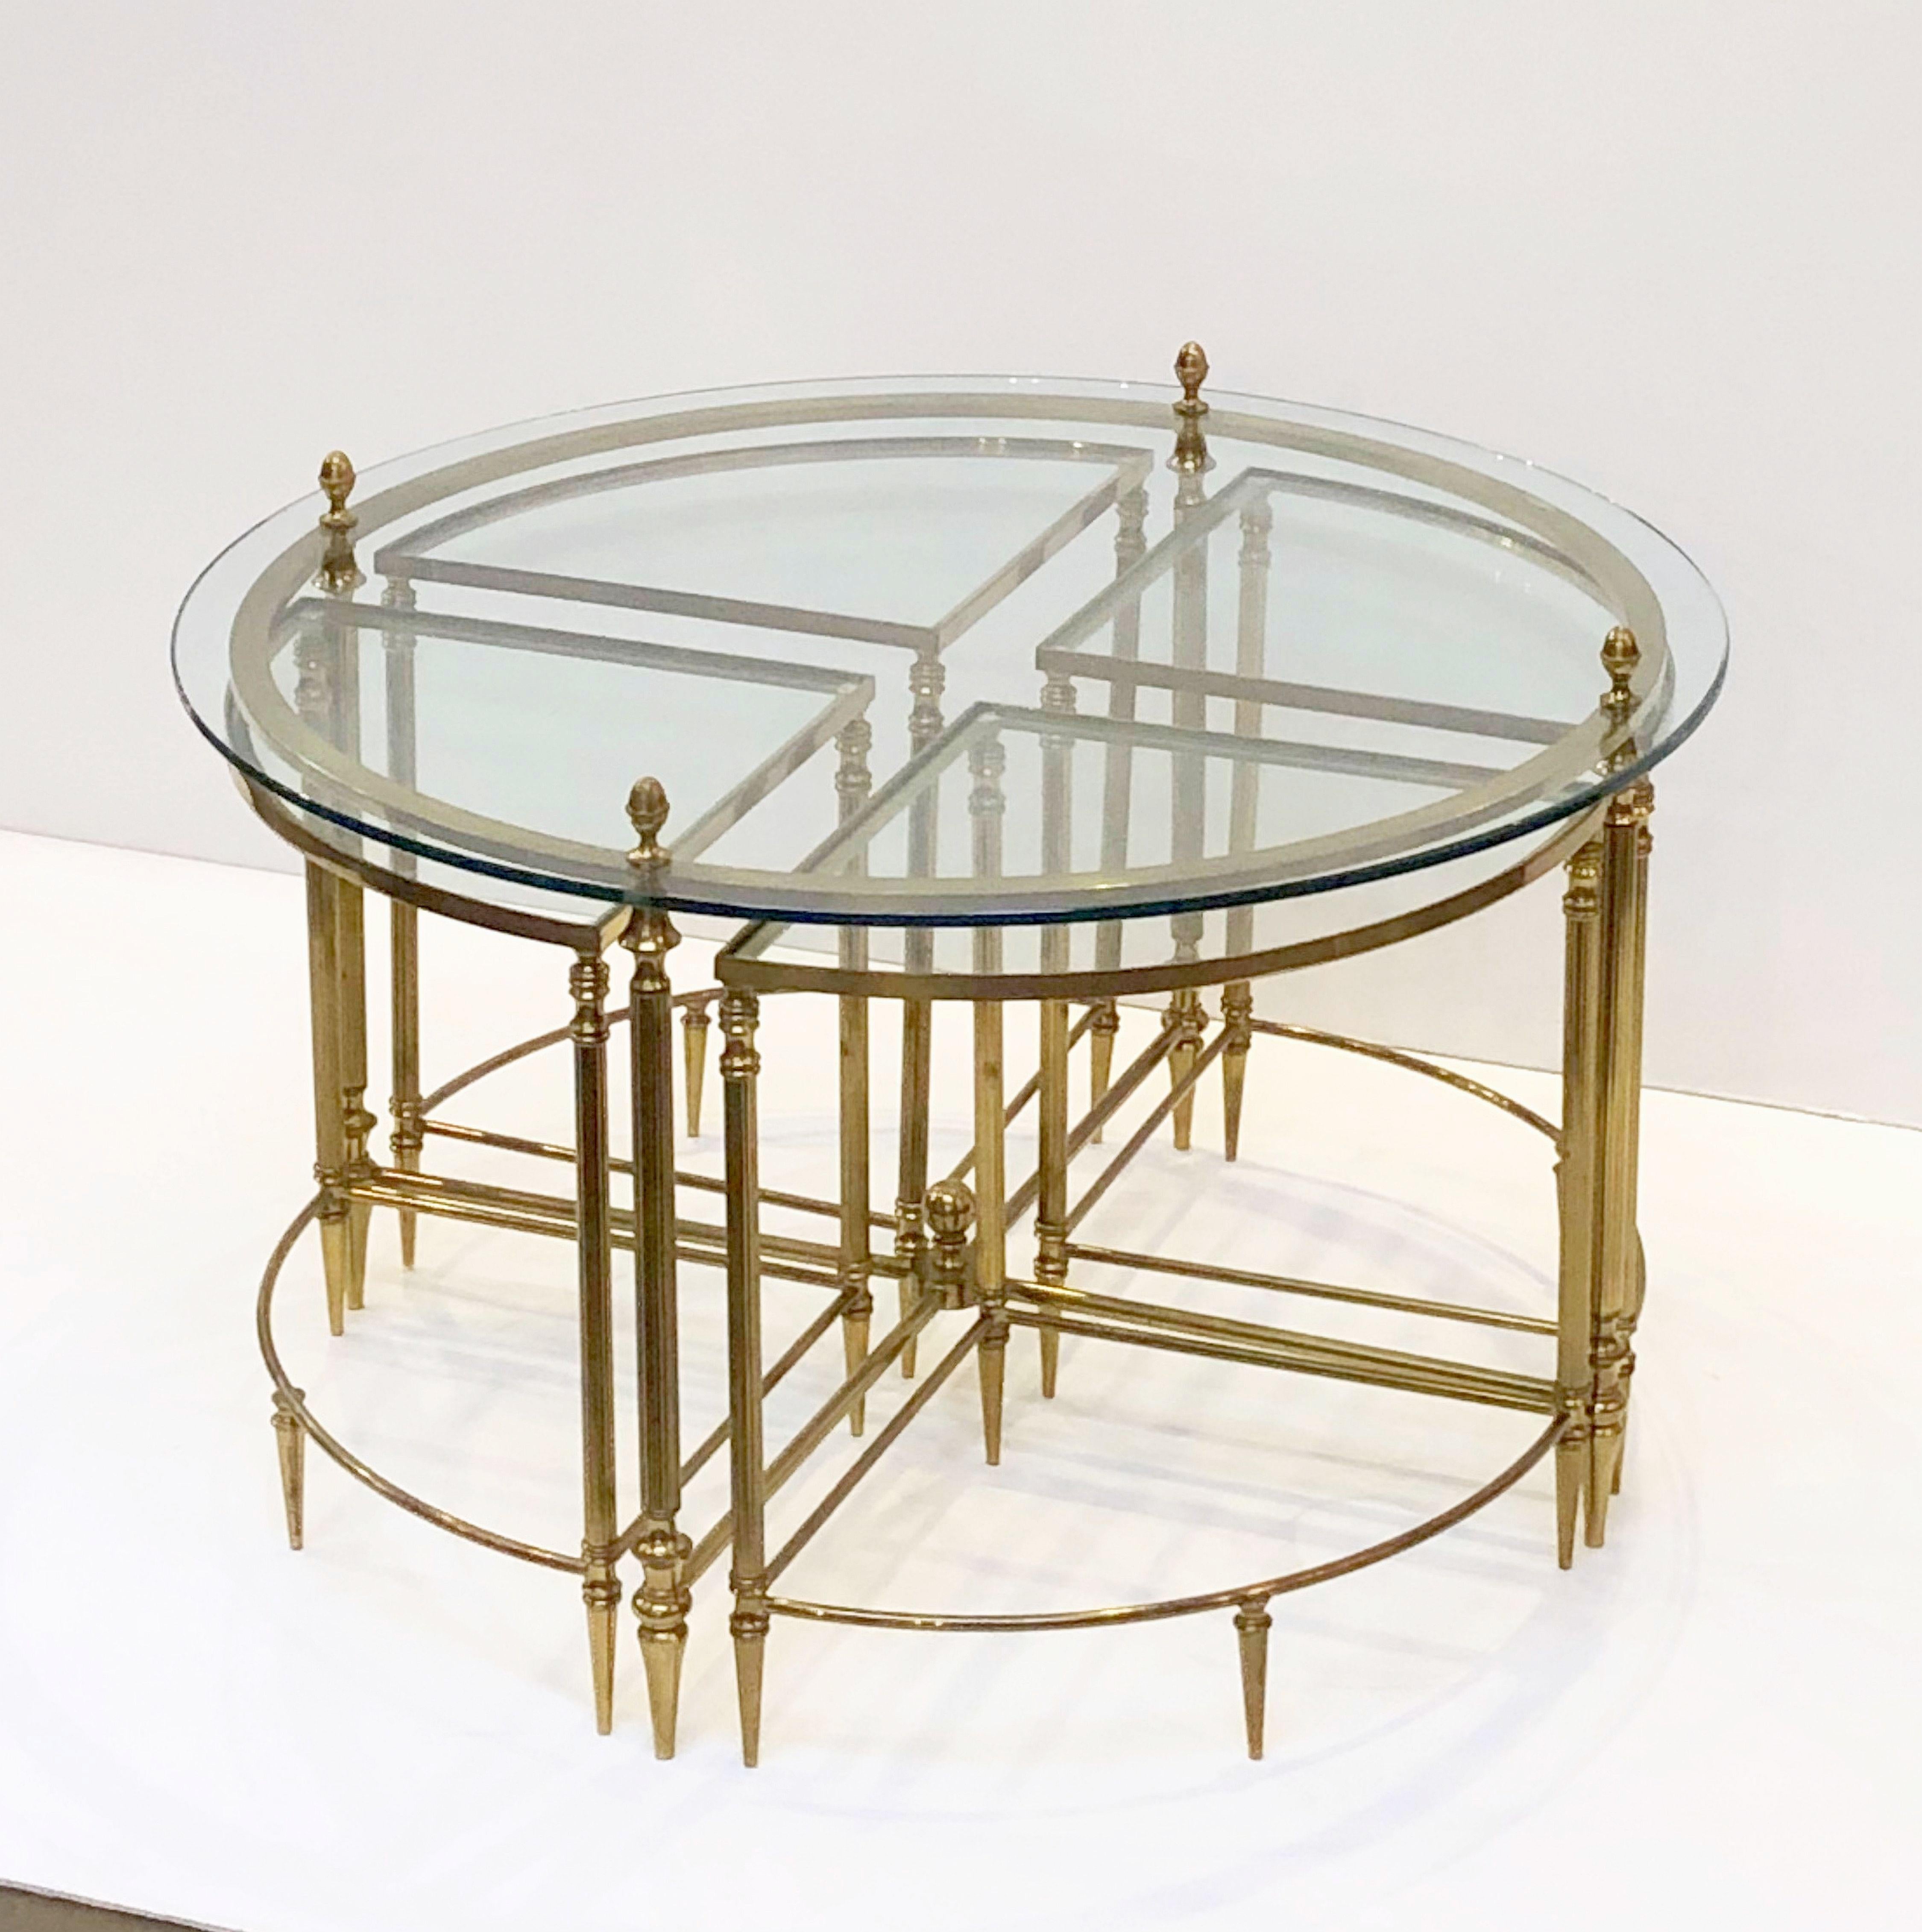 Modern French Circular Glass and Brass Low Table with Four Wedge Nesting Under-Tables